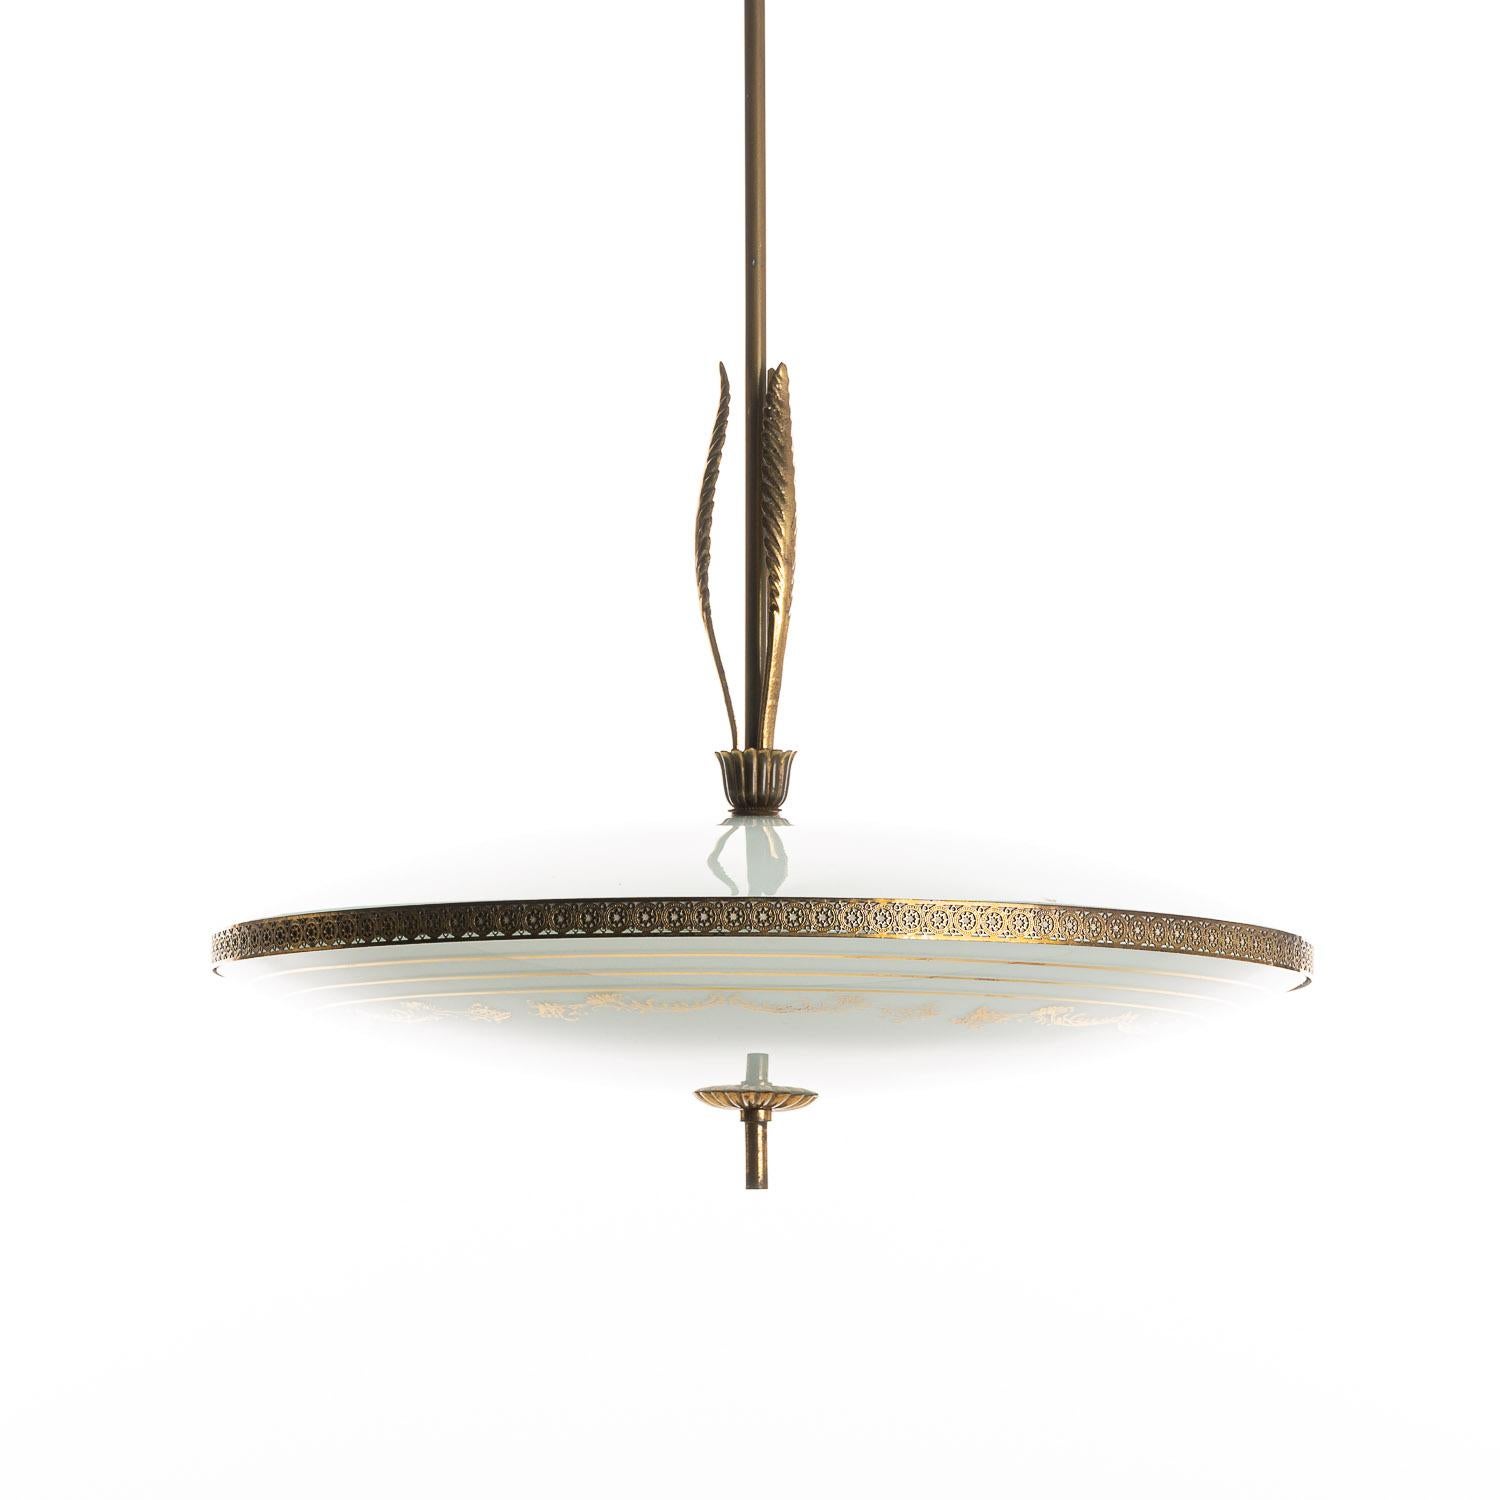 This is a beautiful 1940s pendant-style lamp in the style of Pietro Chiesa. The brass-feather ornamental pieces on the collar add a touch of character that complements the subtle decoration on the light-blue pendant glass. Please note there is some